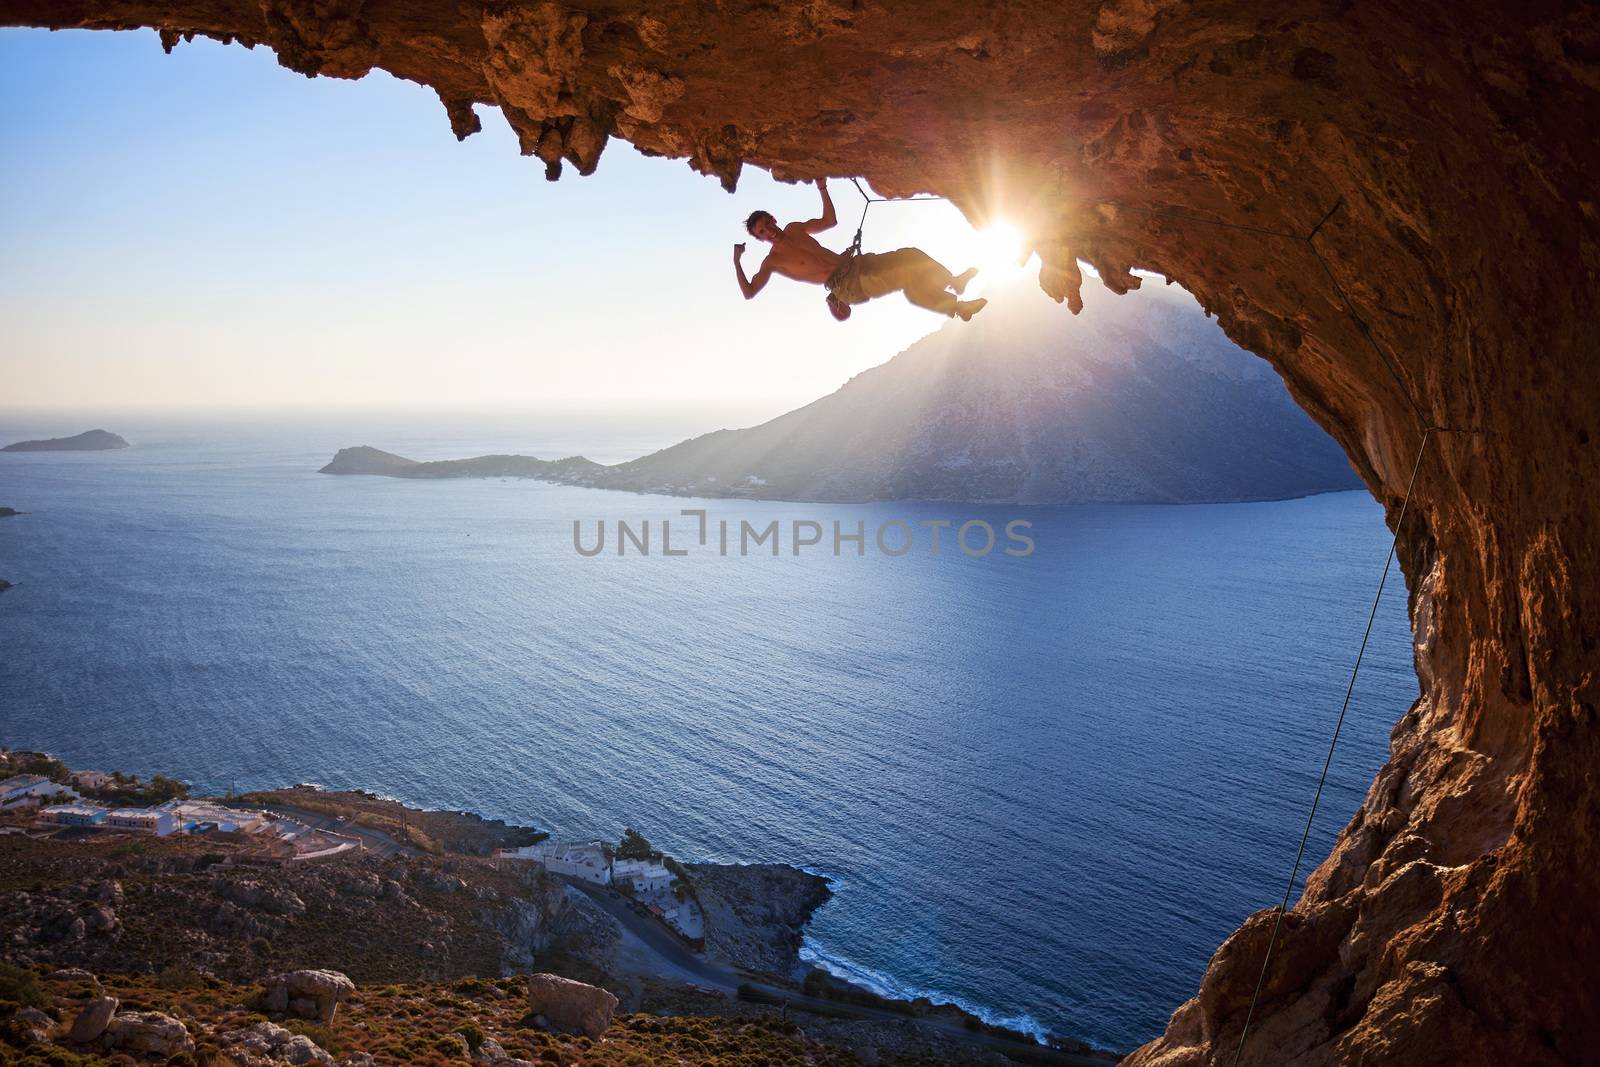 Male rock climber at sunset by photobac